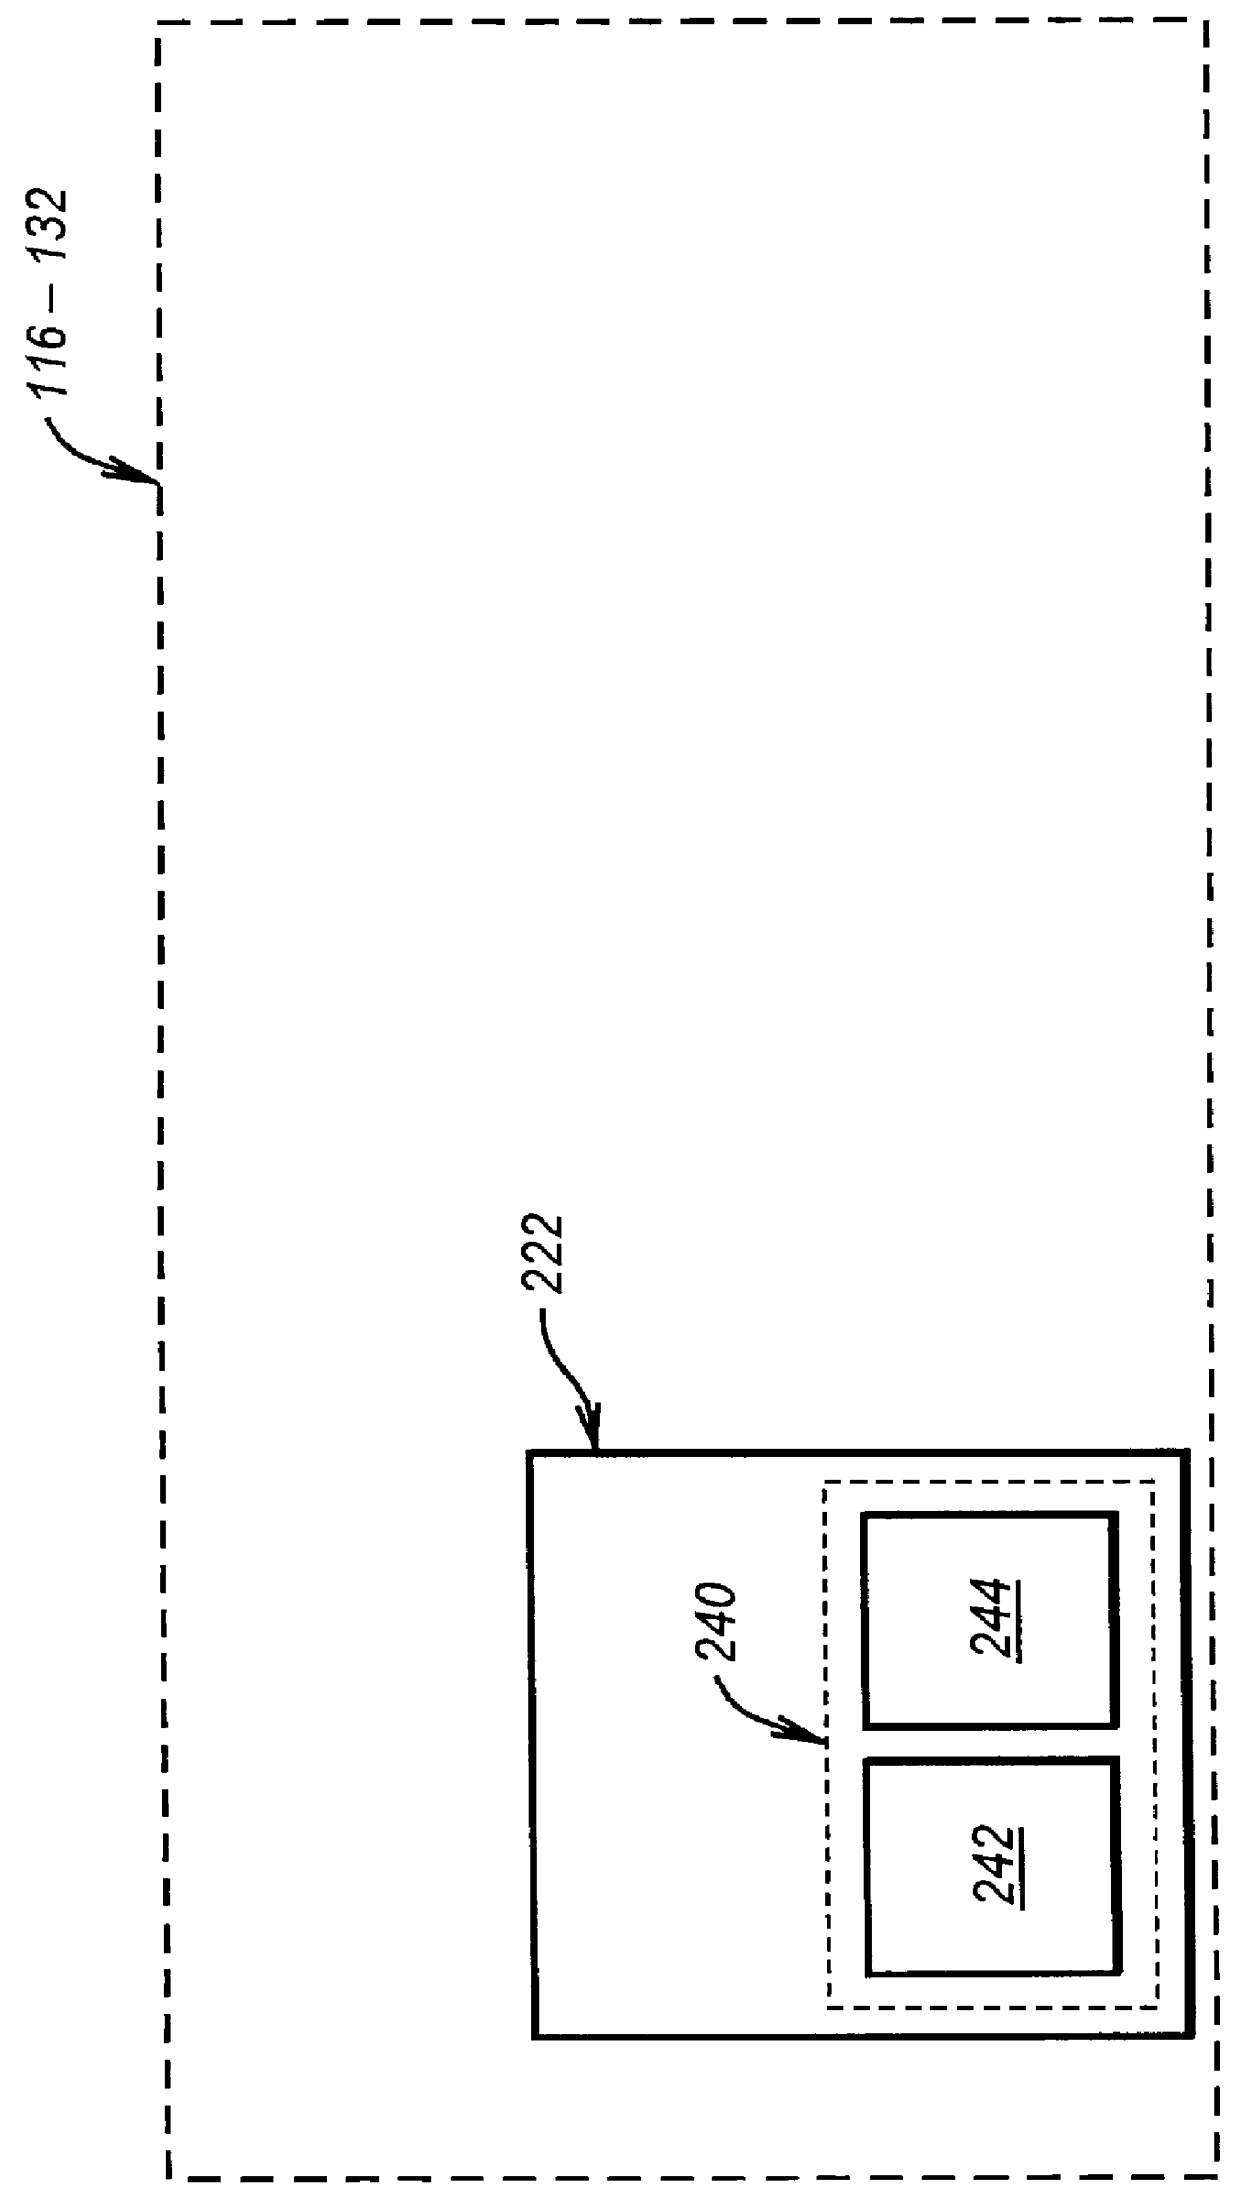 Peripheral controller comprising first messaging unit for communication with first OS driver and second messaging unit for communication with second OS driver for mass-storage peripheral